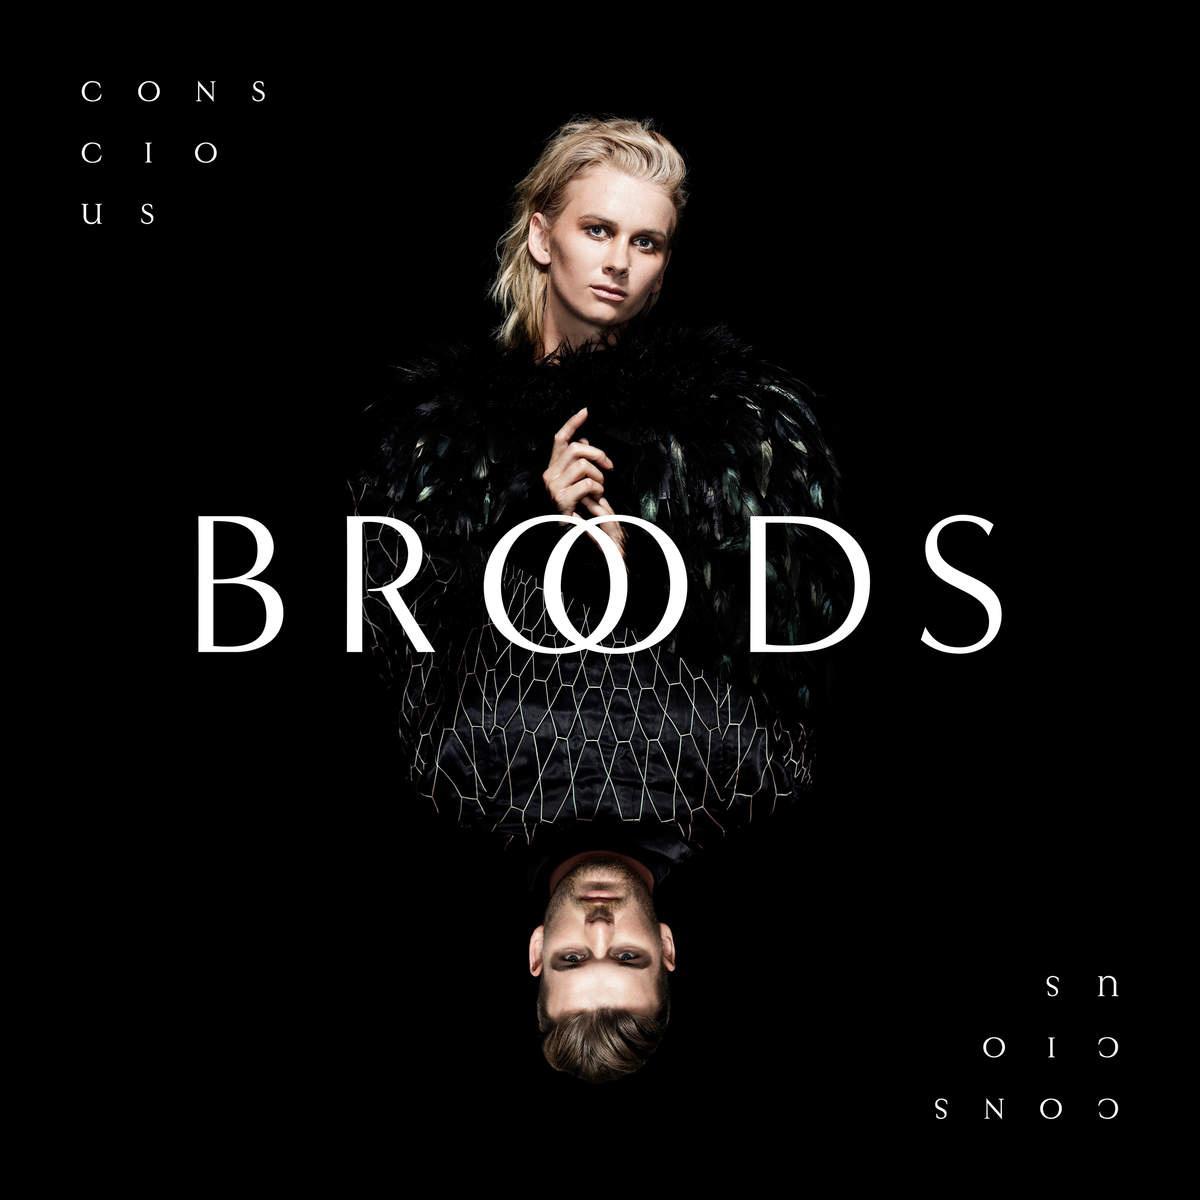 BROODS - Recovery